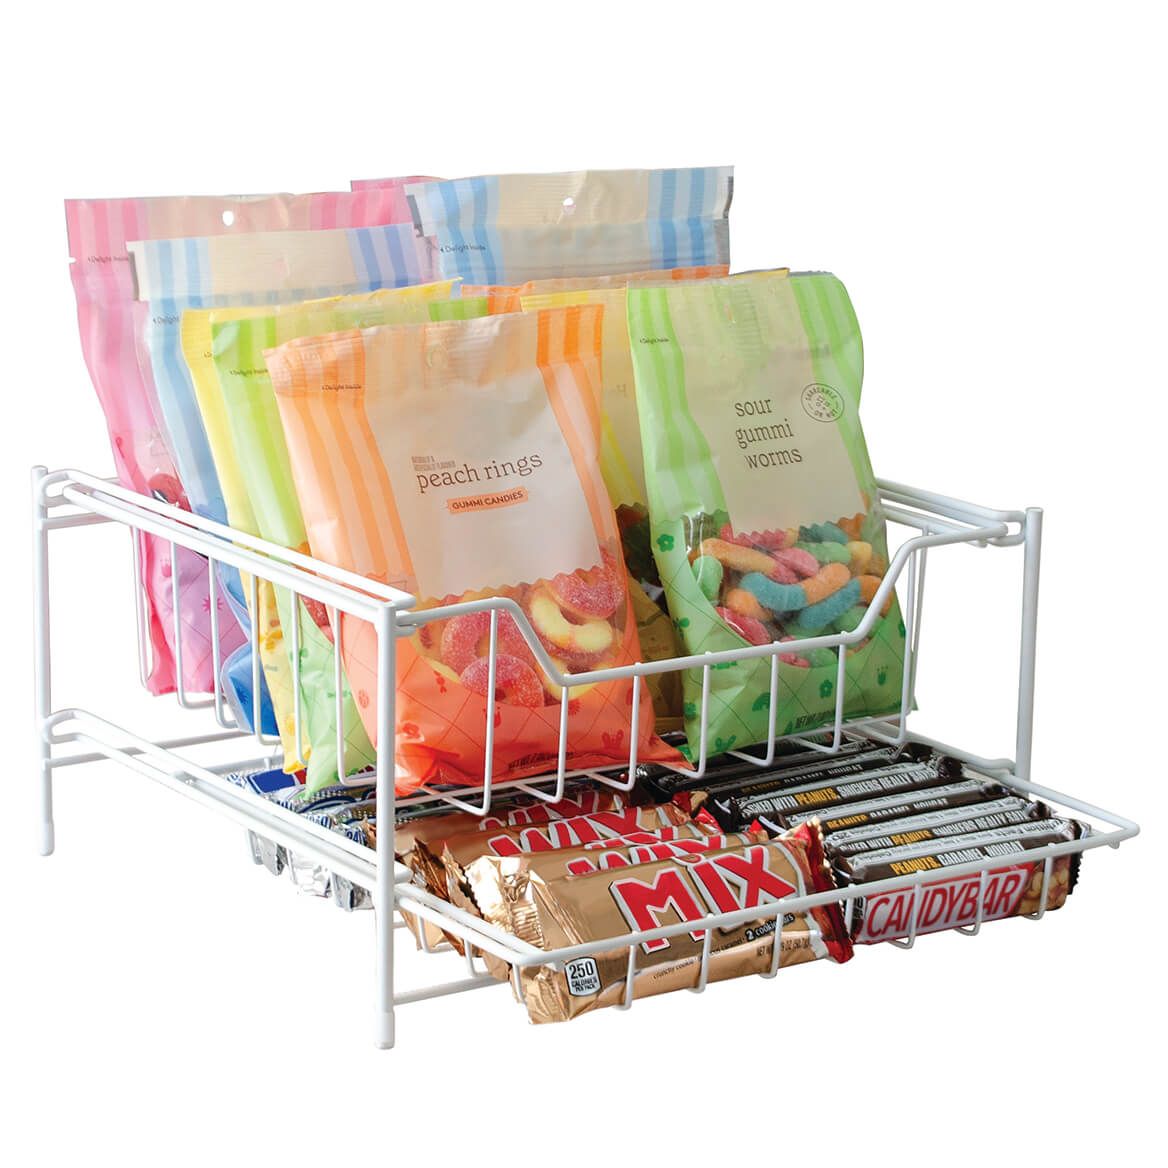 White Pantry Snack Organizer by Home Marketplace + '-' + 375679